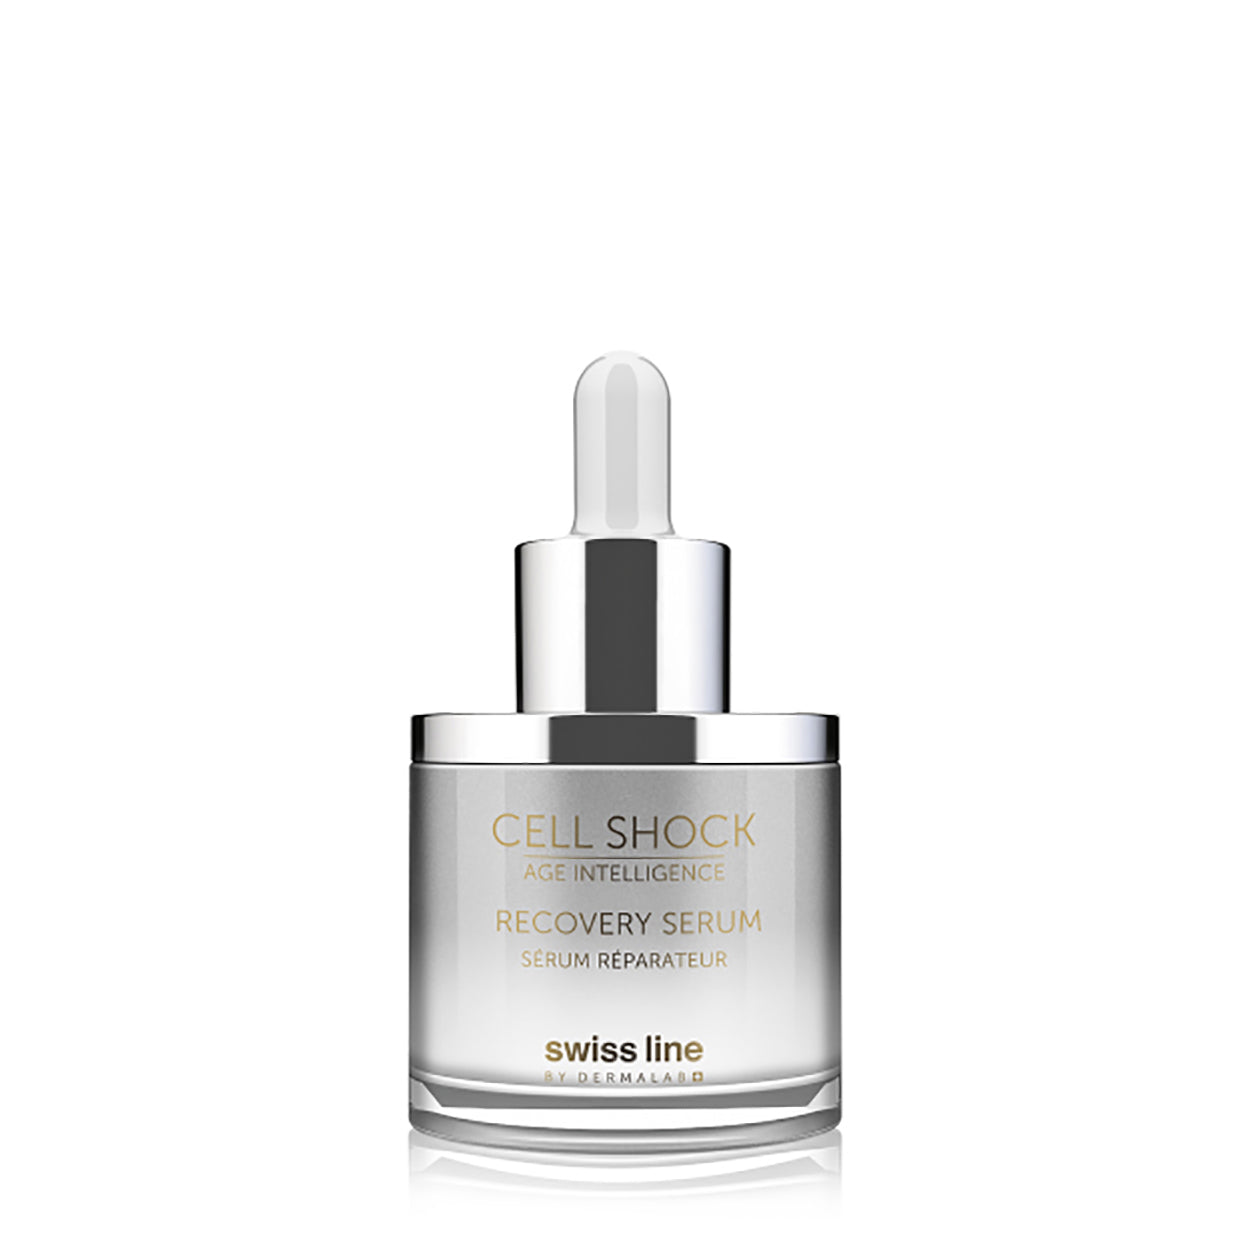 Swiss Line – Cell Shock Age Intelligence – Recovery Serum